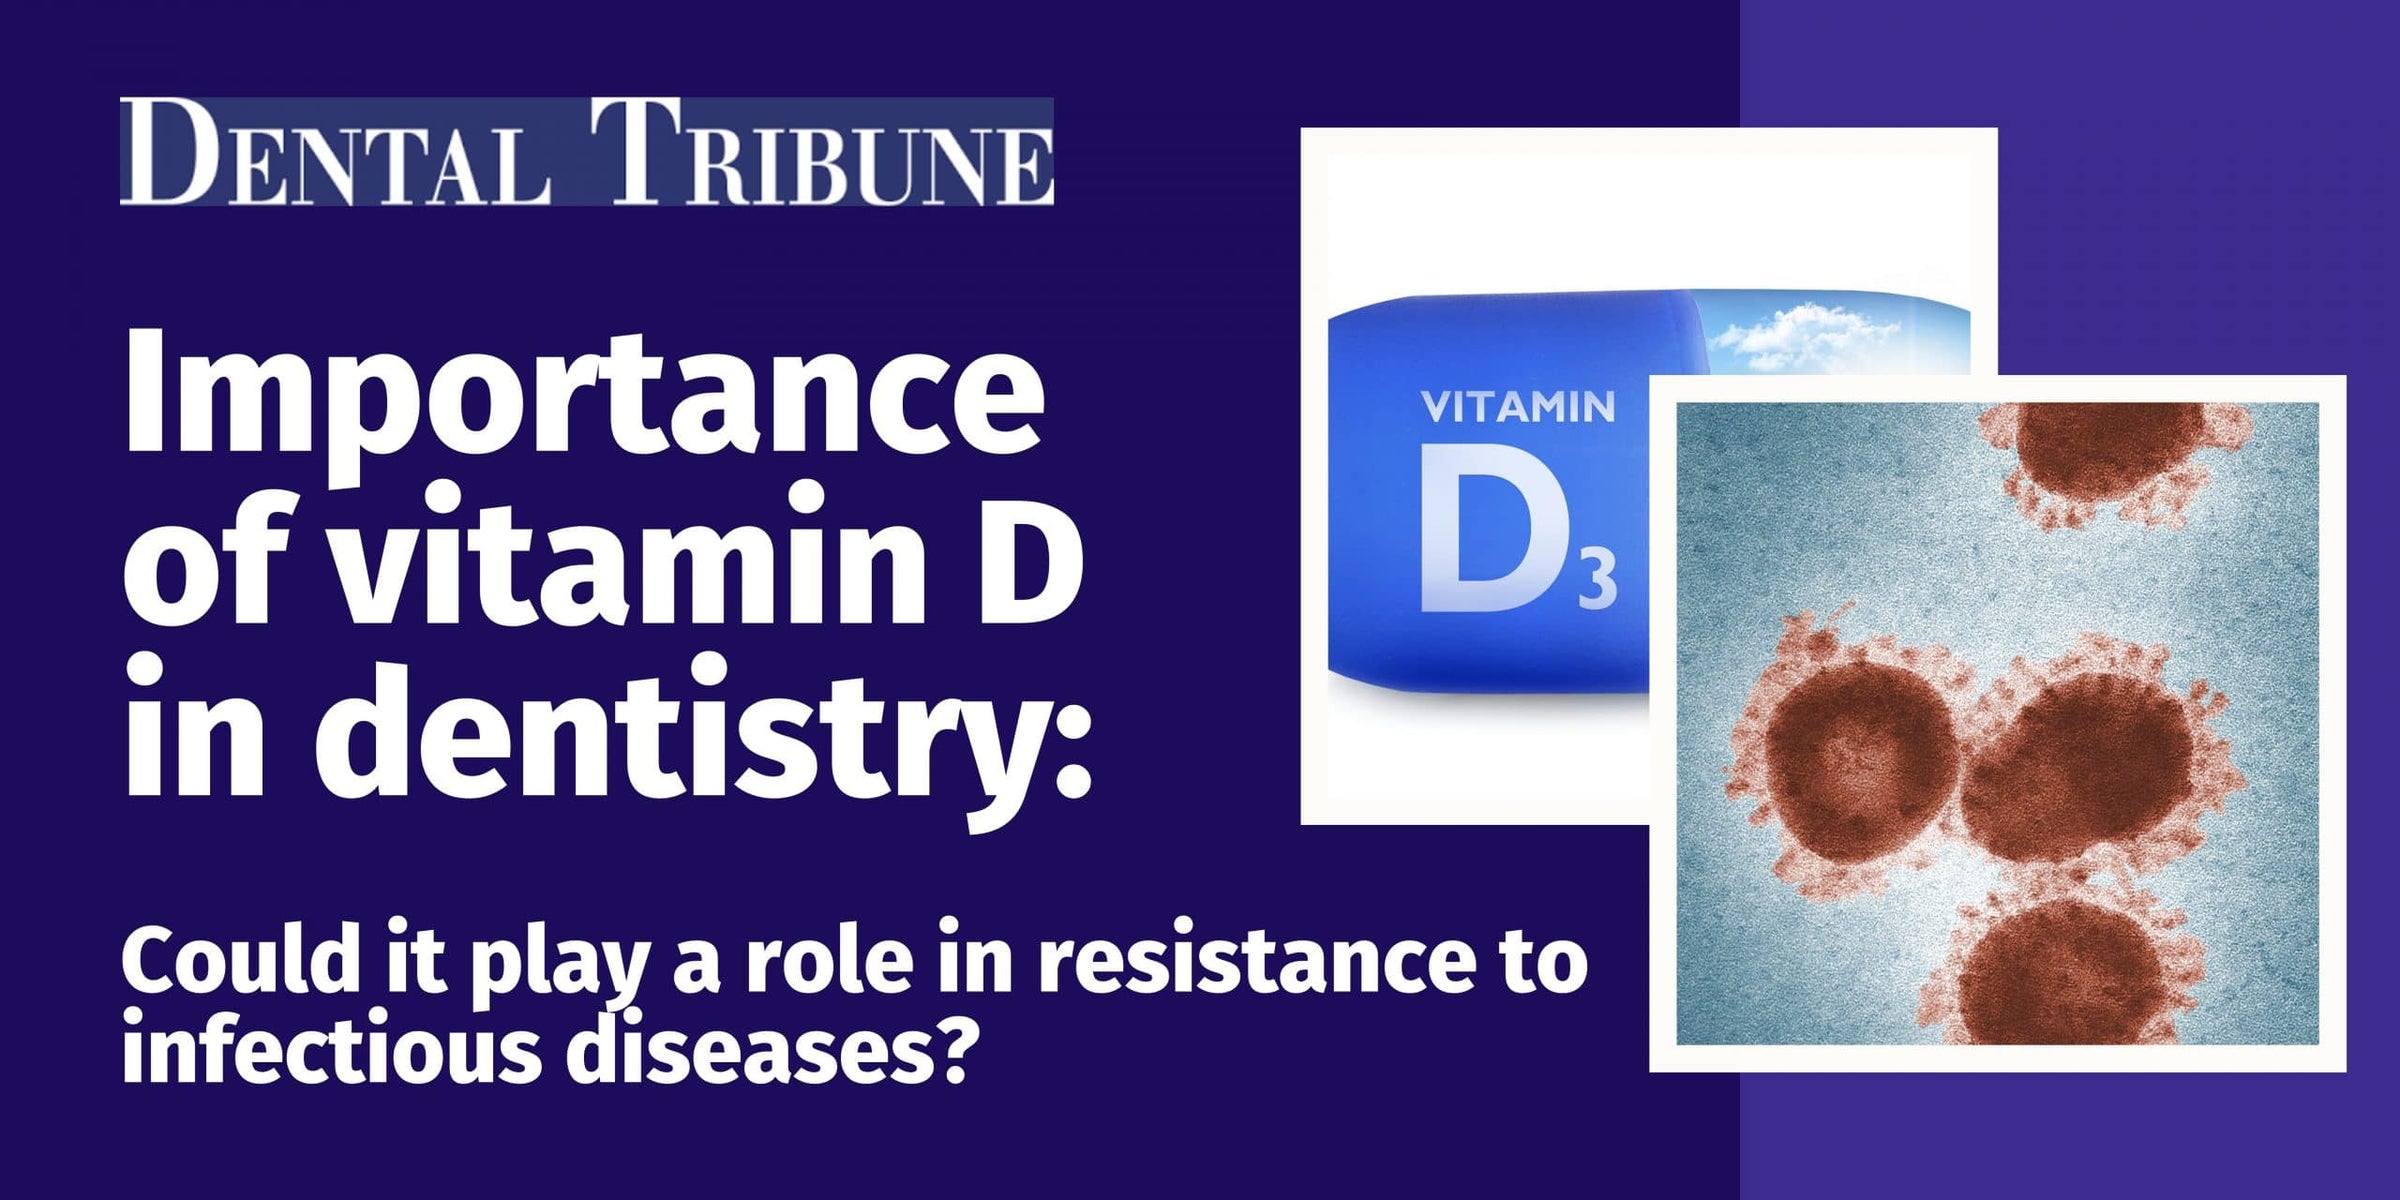 Importance of vitamin D in dentistry: Could it play a role in resistance to infectious diseases? Image